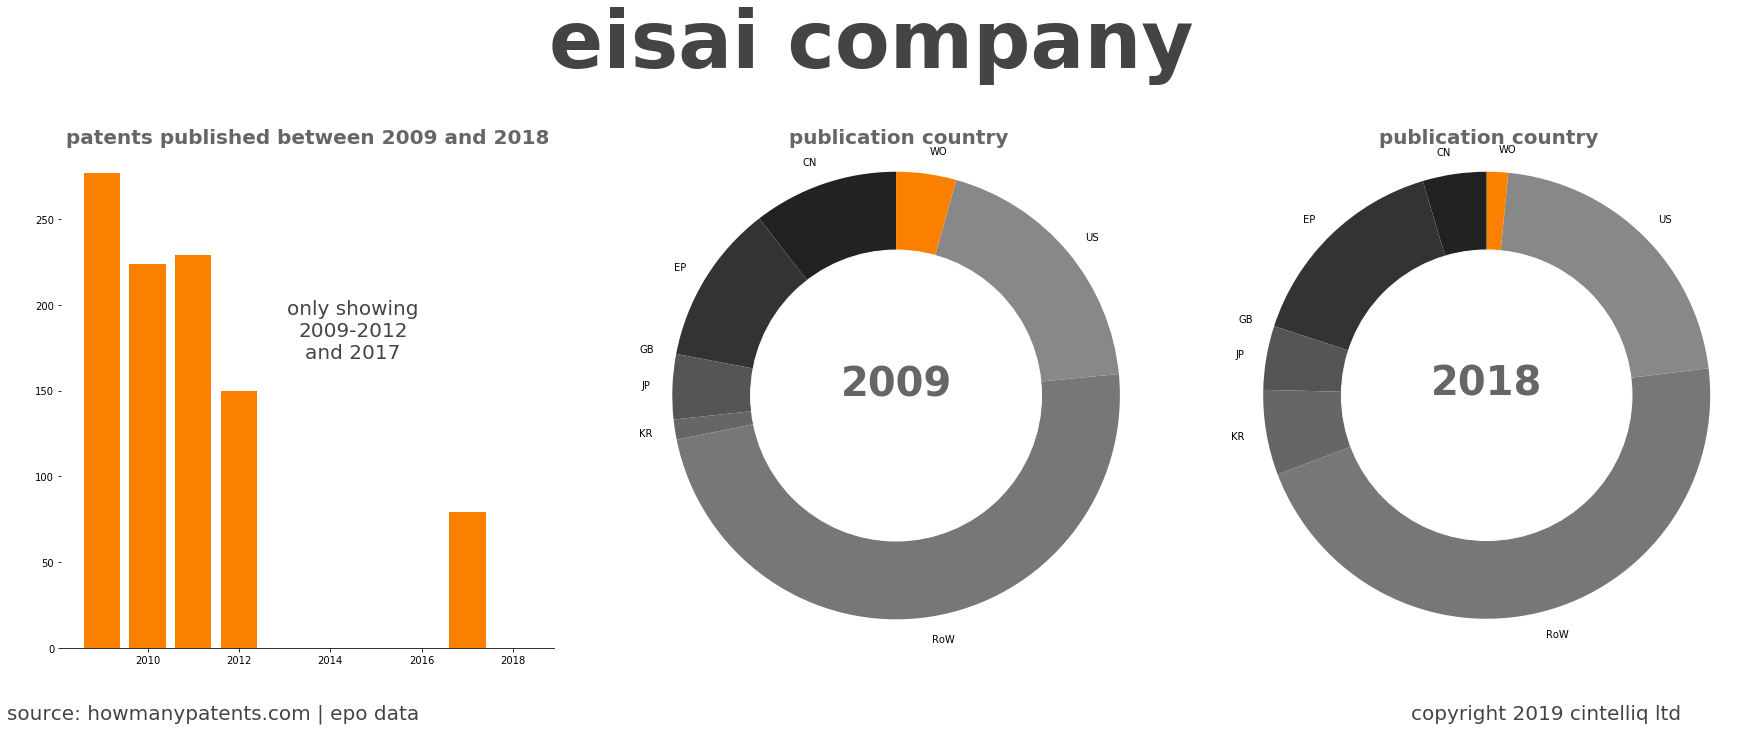 summary of patents for Eisai Company